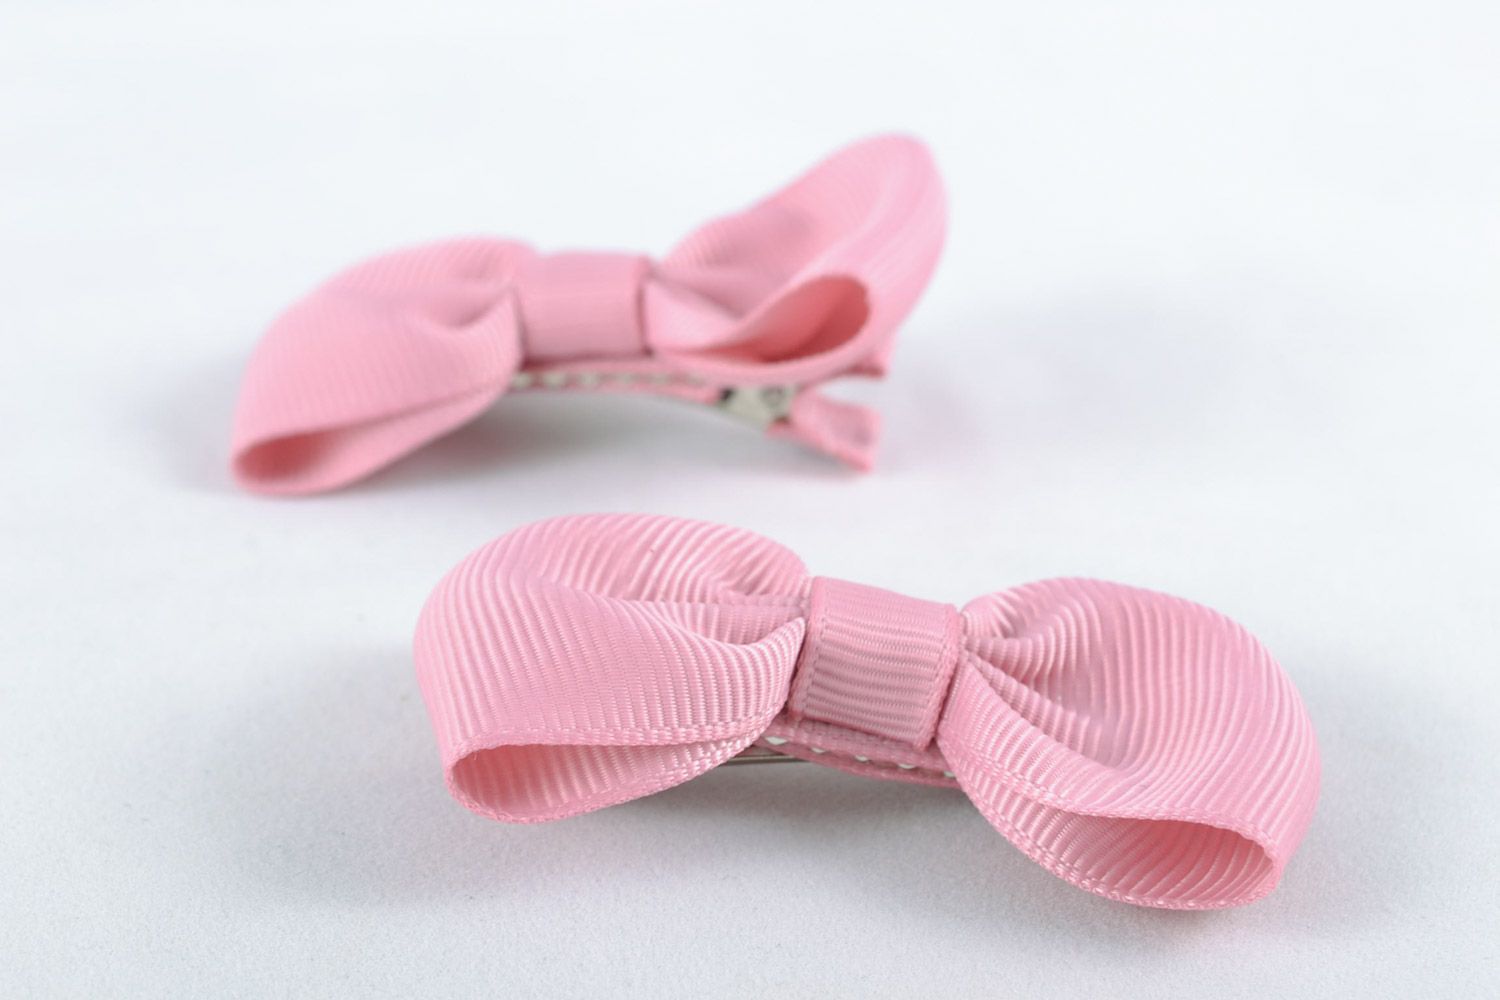 Handmade decorative hair clips with bows set of 2 pieces pink small hair accessories photo 3